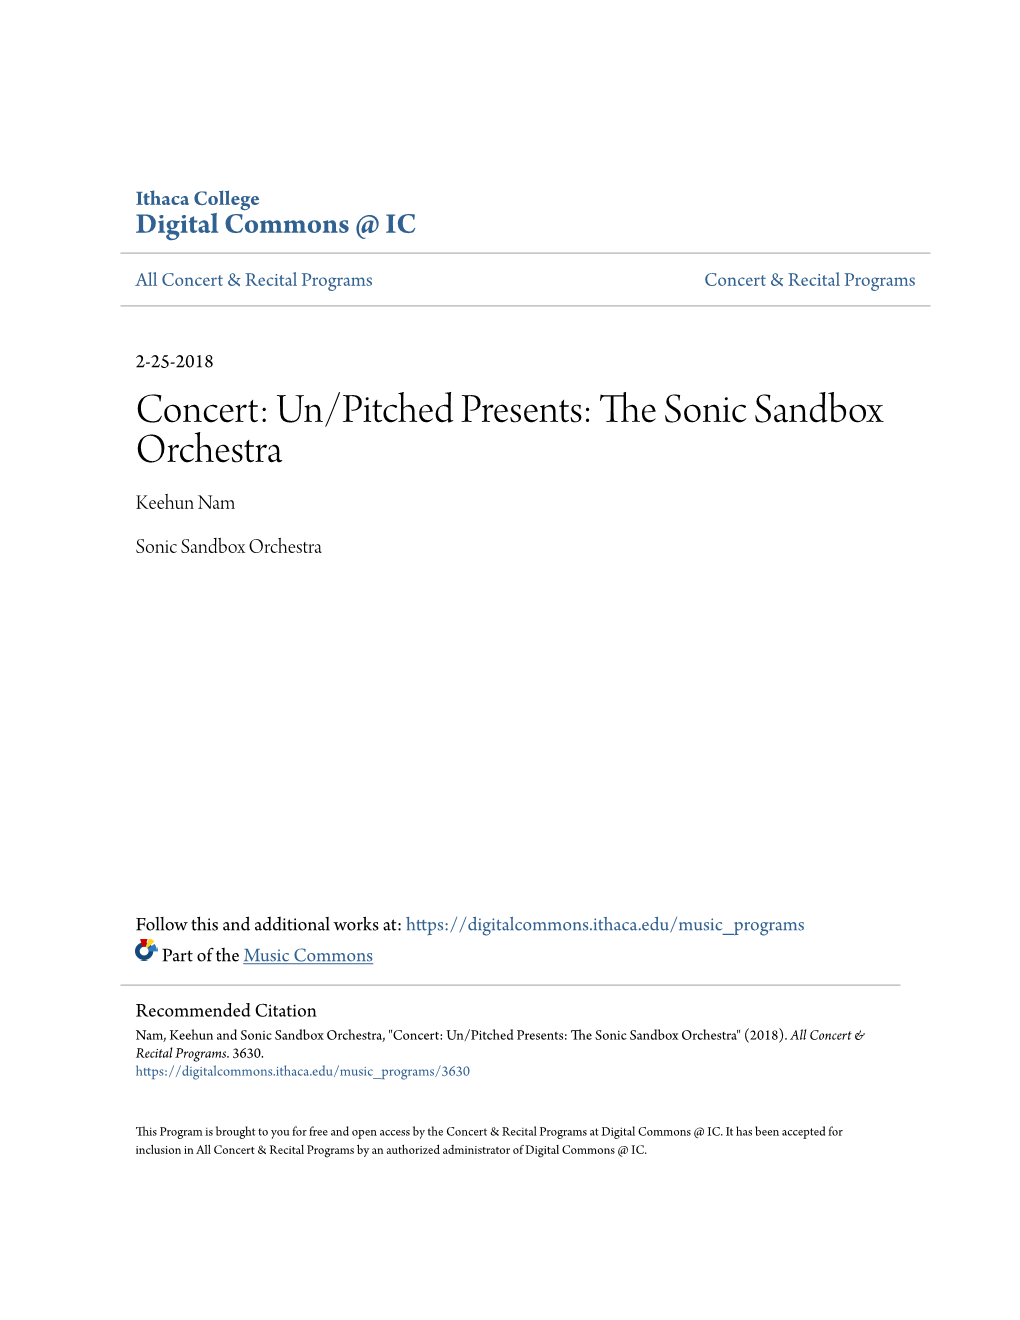 Concert: Un/Pitched Presents: the Sonic Sandbox Orchestra